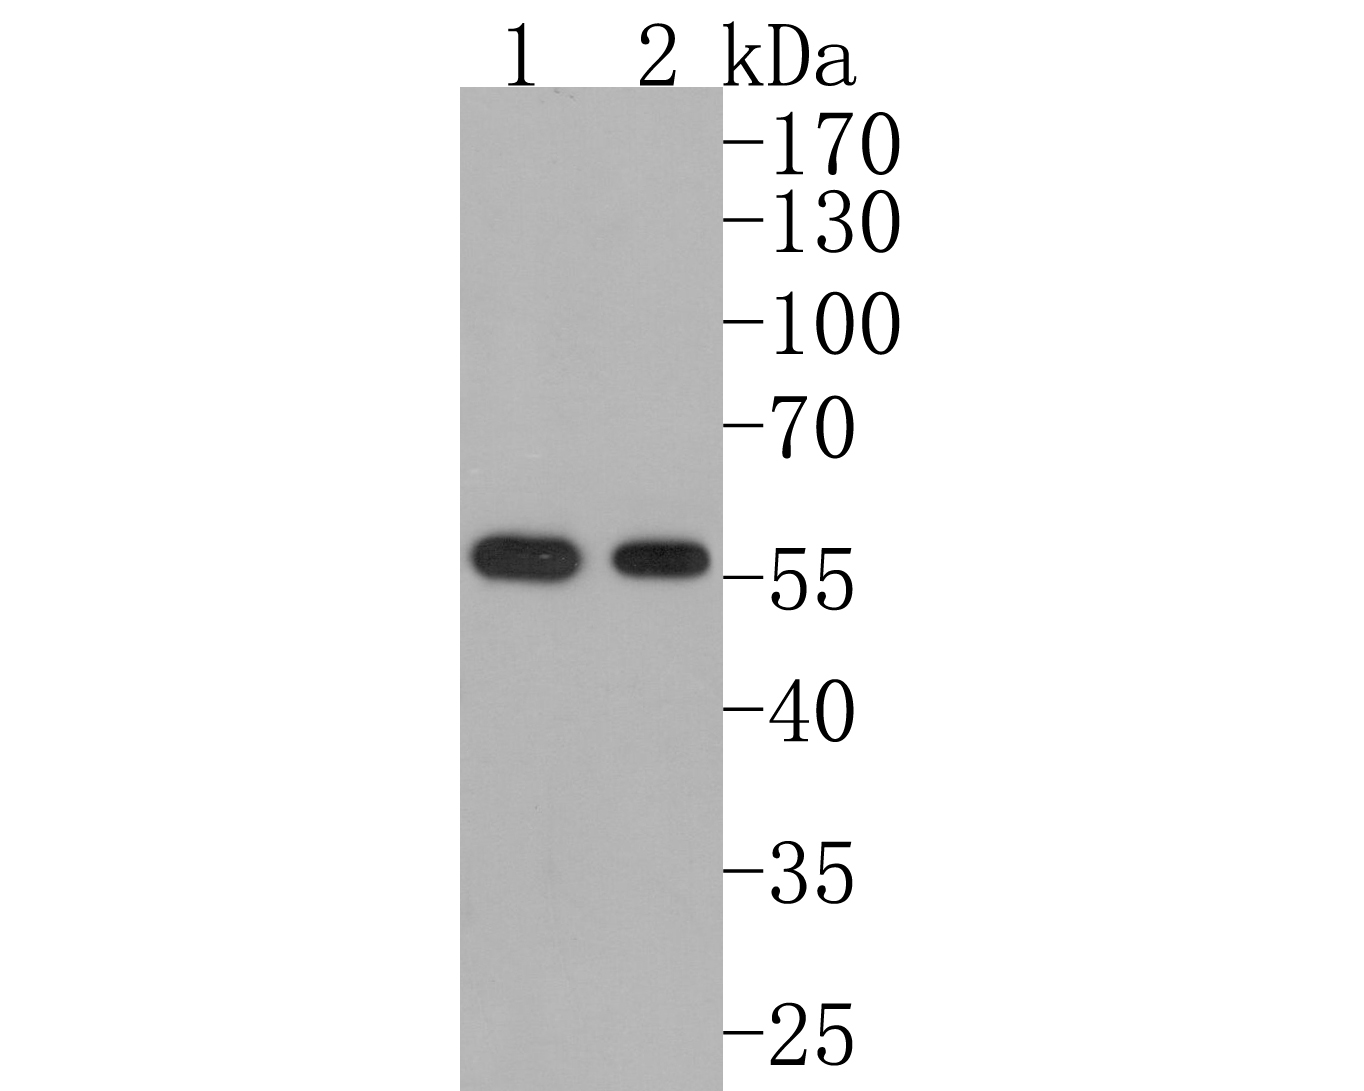 Western blot analysis of IMPDH2 on different lysates. Proteins were transferred to a PVDF membrane and blocked with 5% BSA in PBS for 1 hour at room temperature. The primary antibody (ET7109-16, 1/500) was used in 5% BSA at room temperature for 2 hours. Goat Anti-Rabbit IgG - HRP Secondary Antibody (HA1001) at 1:200,000 dilution was used for 1 hour at room temperature.<br />
Positive control: <br />
Lane 1: Daudi cell lysate<br />
Lane 2: A431 cell lysate